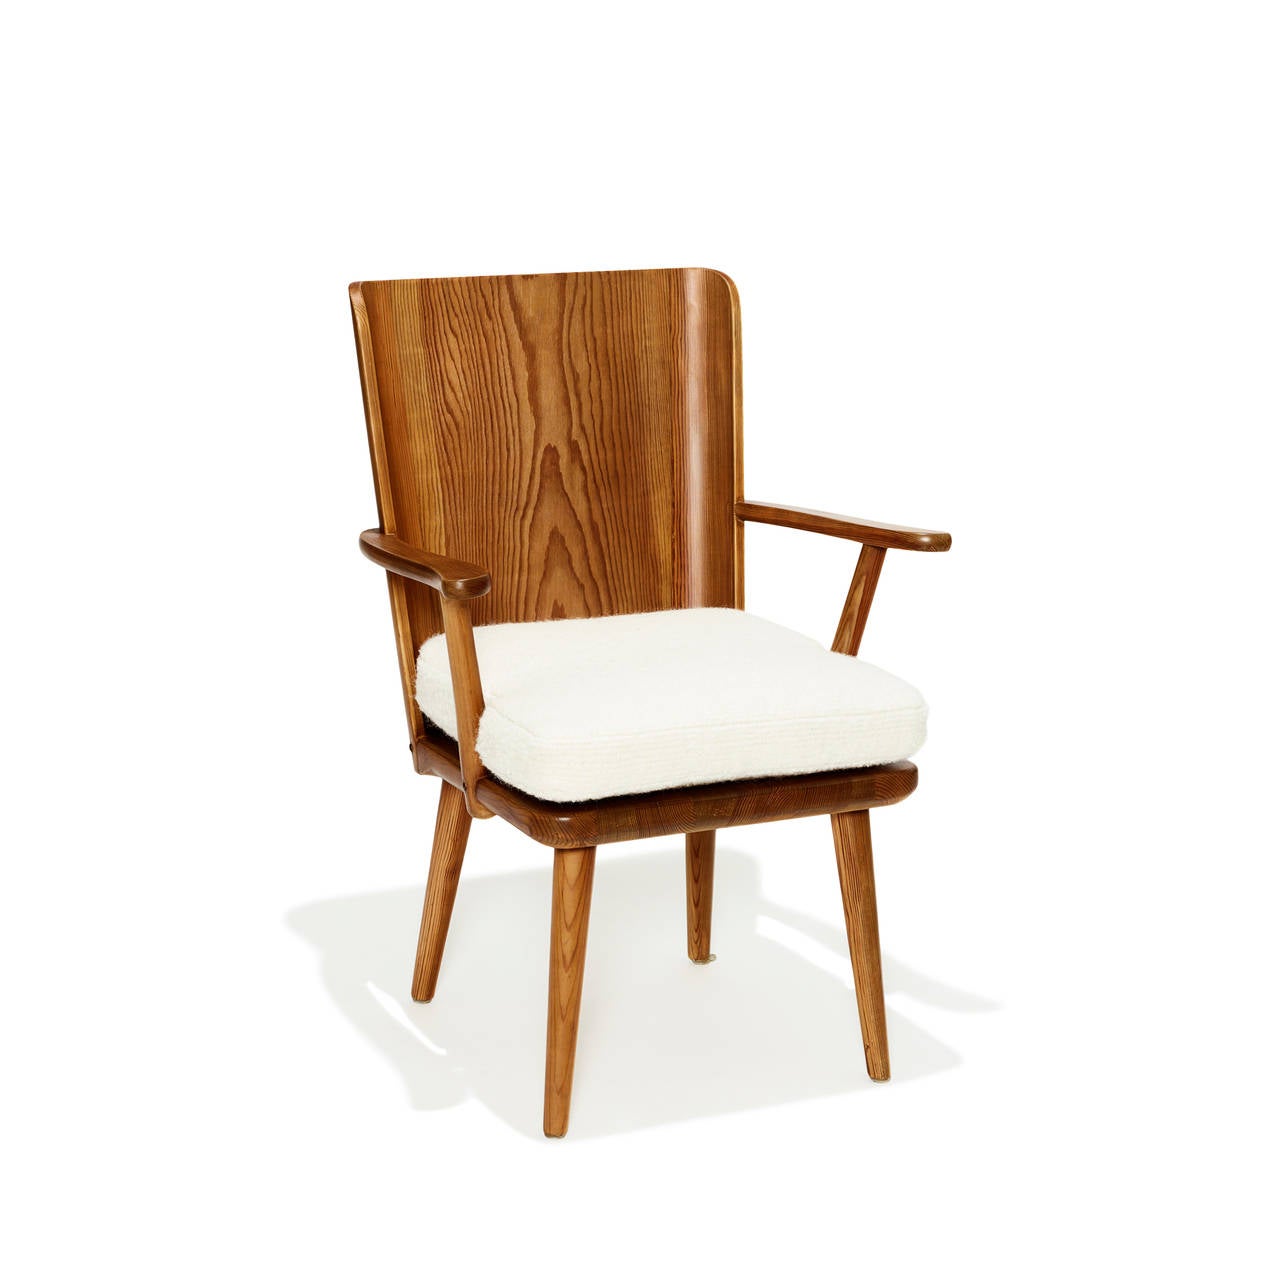 This pair of armchairs in solid pine with bent laminated pine back is a wonderful example of Swedish modernism's ability to use aspects of traditional furniture forms to soften modern design for the home. Executed by Karl Andersson & Söner,